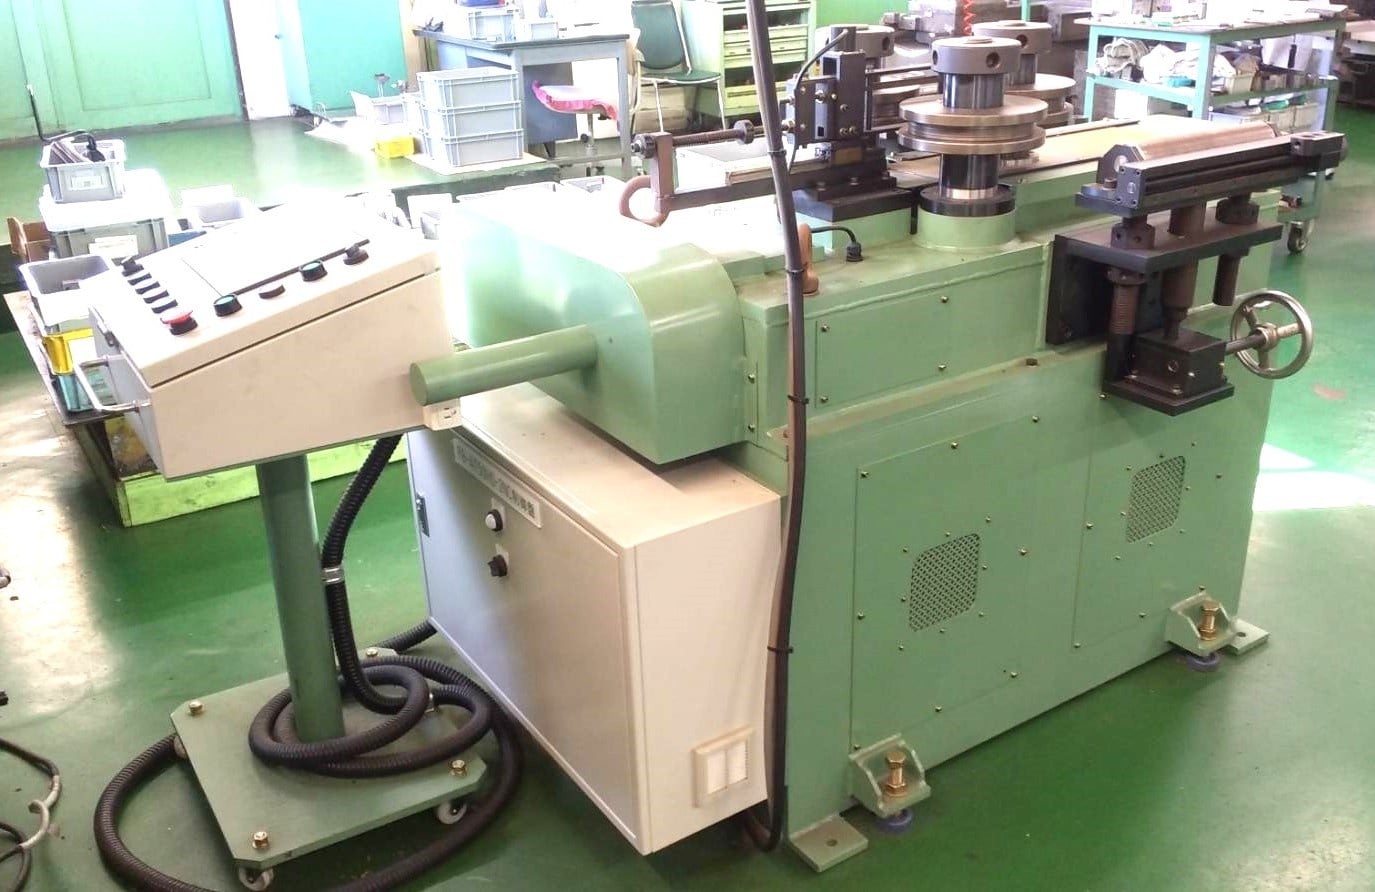 Vendor ｜ Sale and purchase of new used machines and used machine